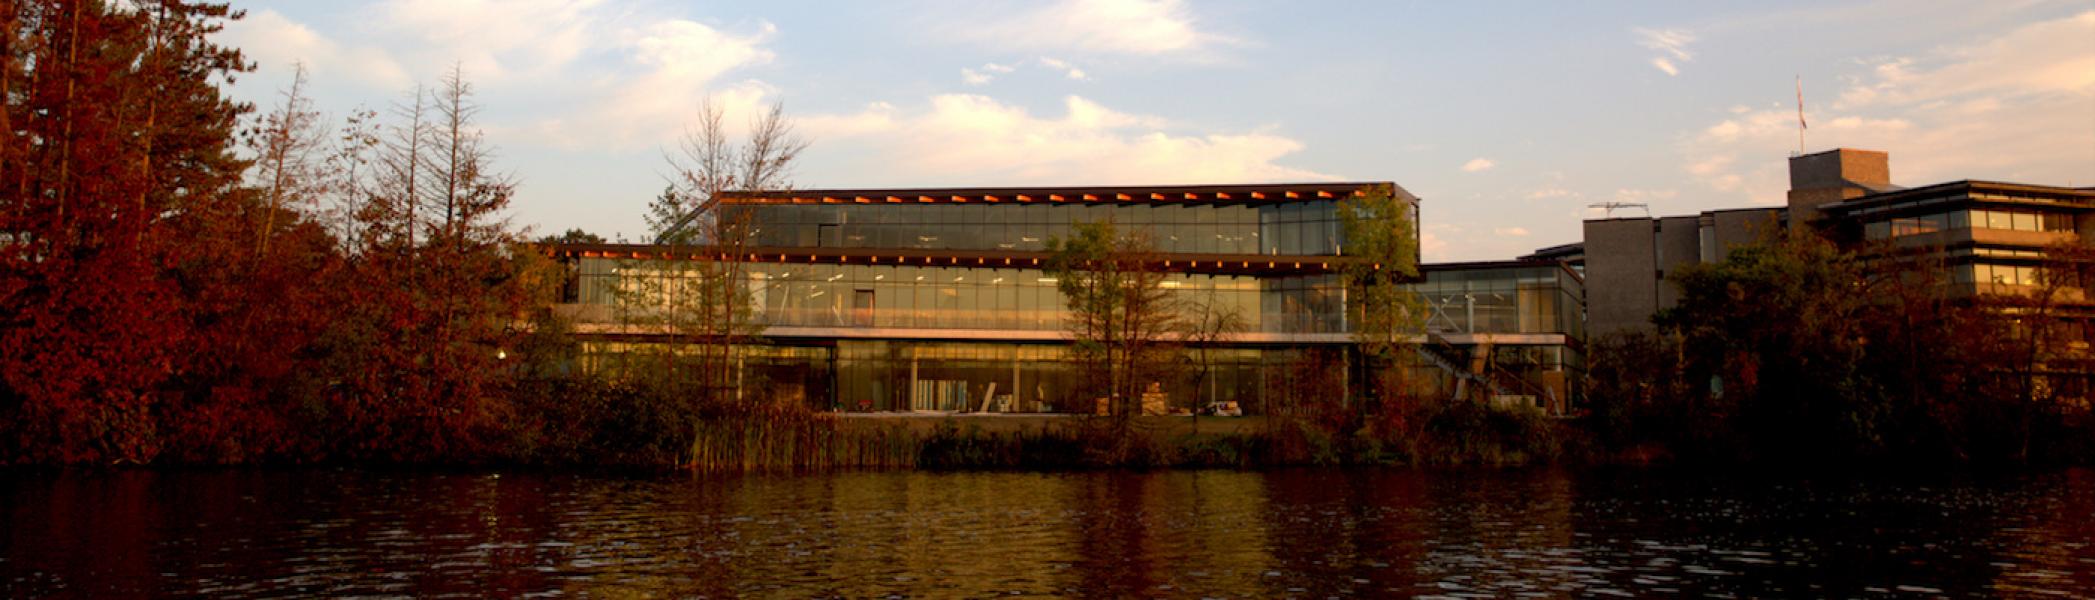 An exterior view of the student center with the river in the foreground